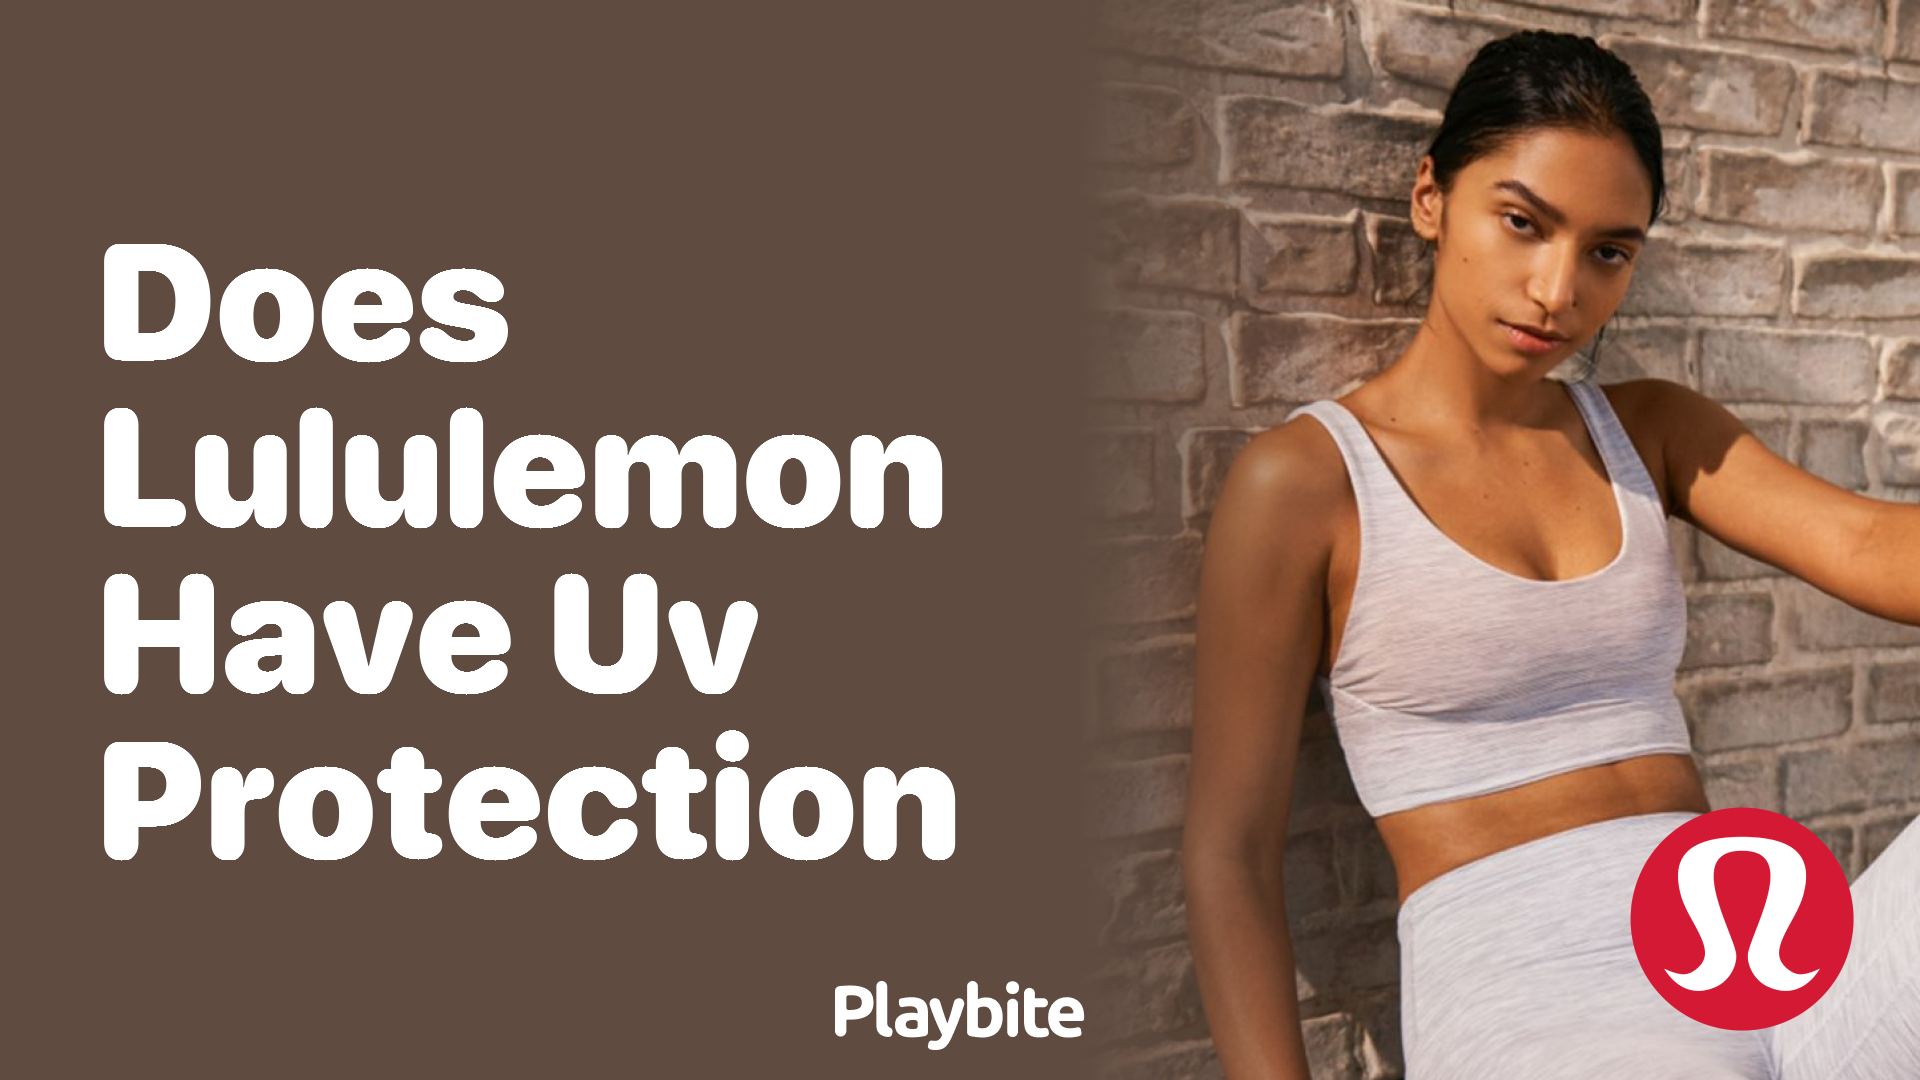 Does Lululemon Offer UV Protection in Their Apparel? - Playbite